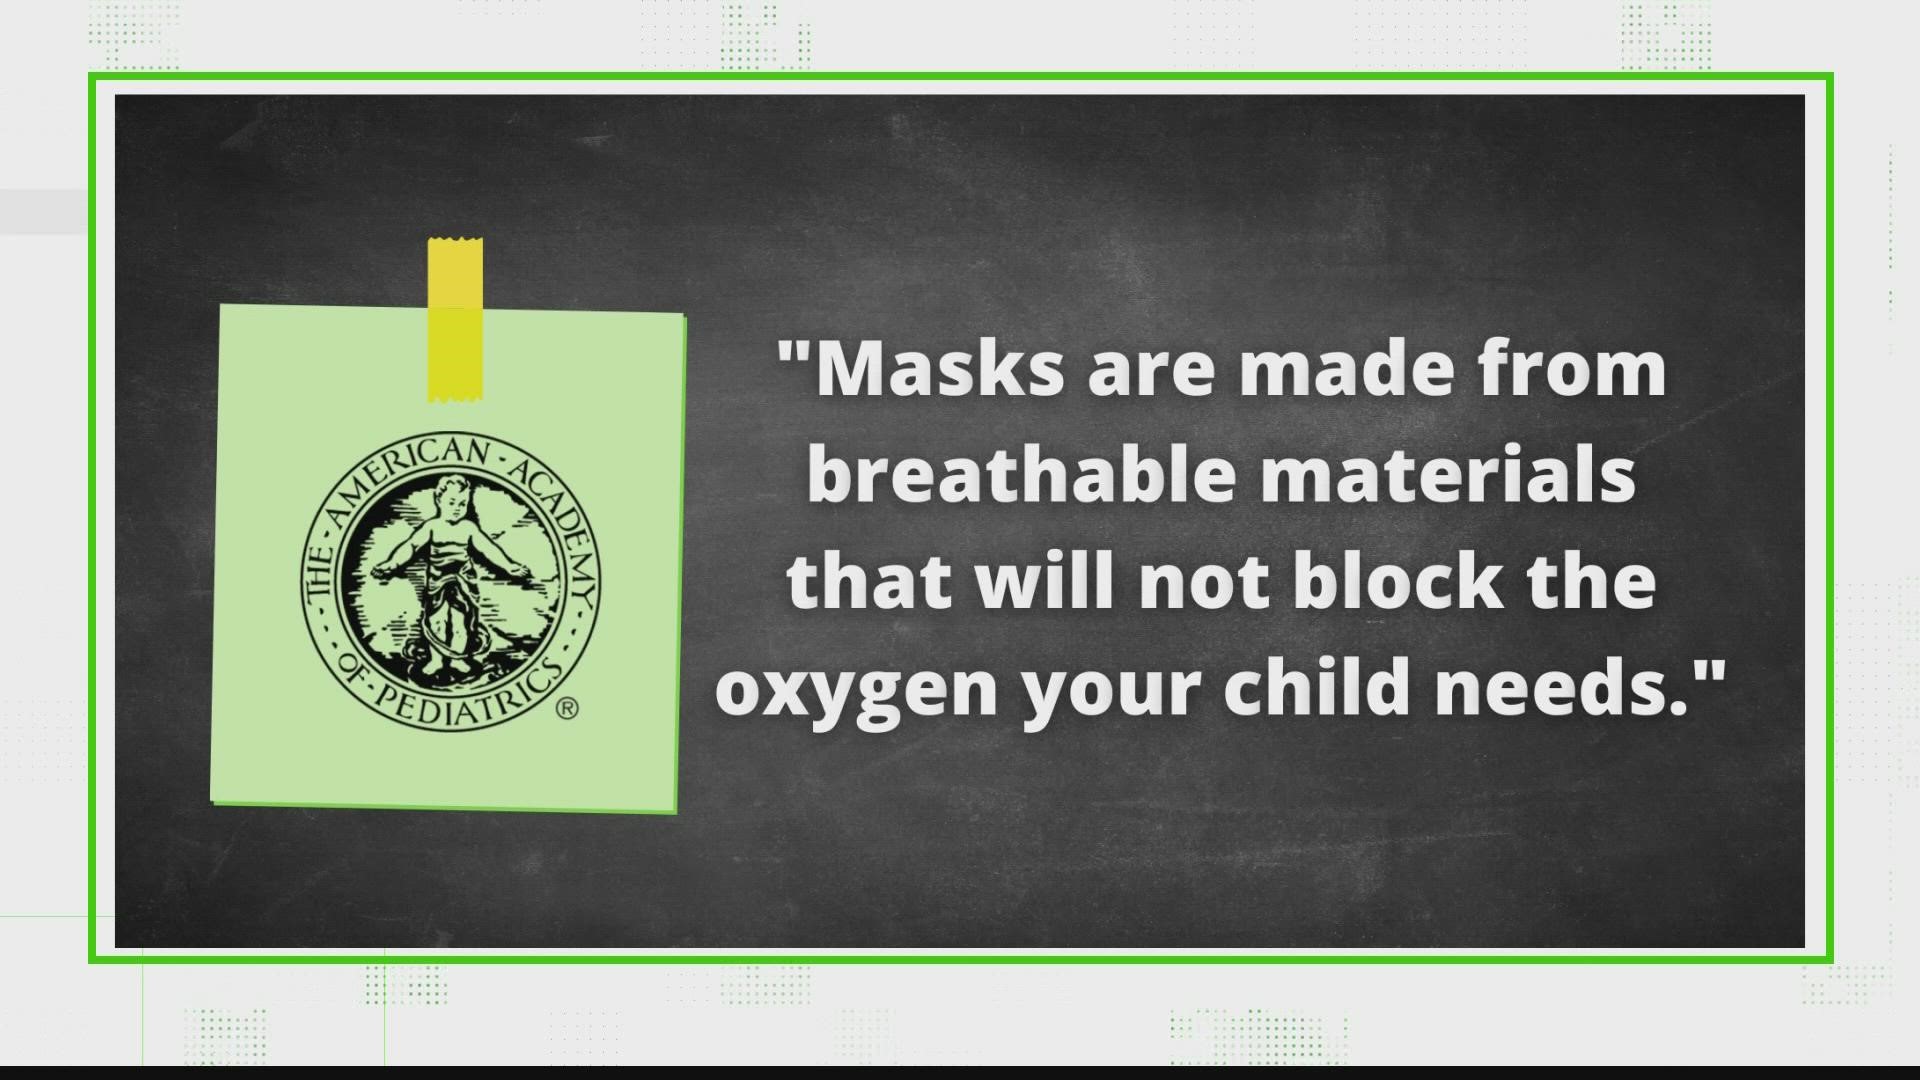 Masks in school has been a hot topic recently as kids are returning to the classroom this month.